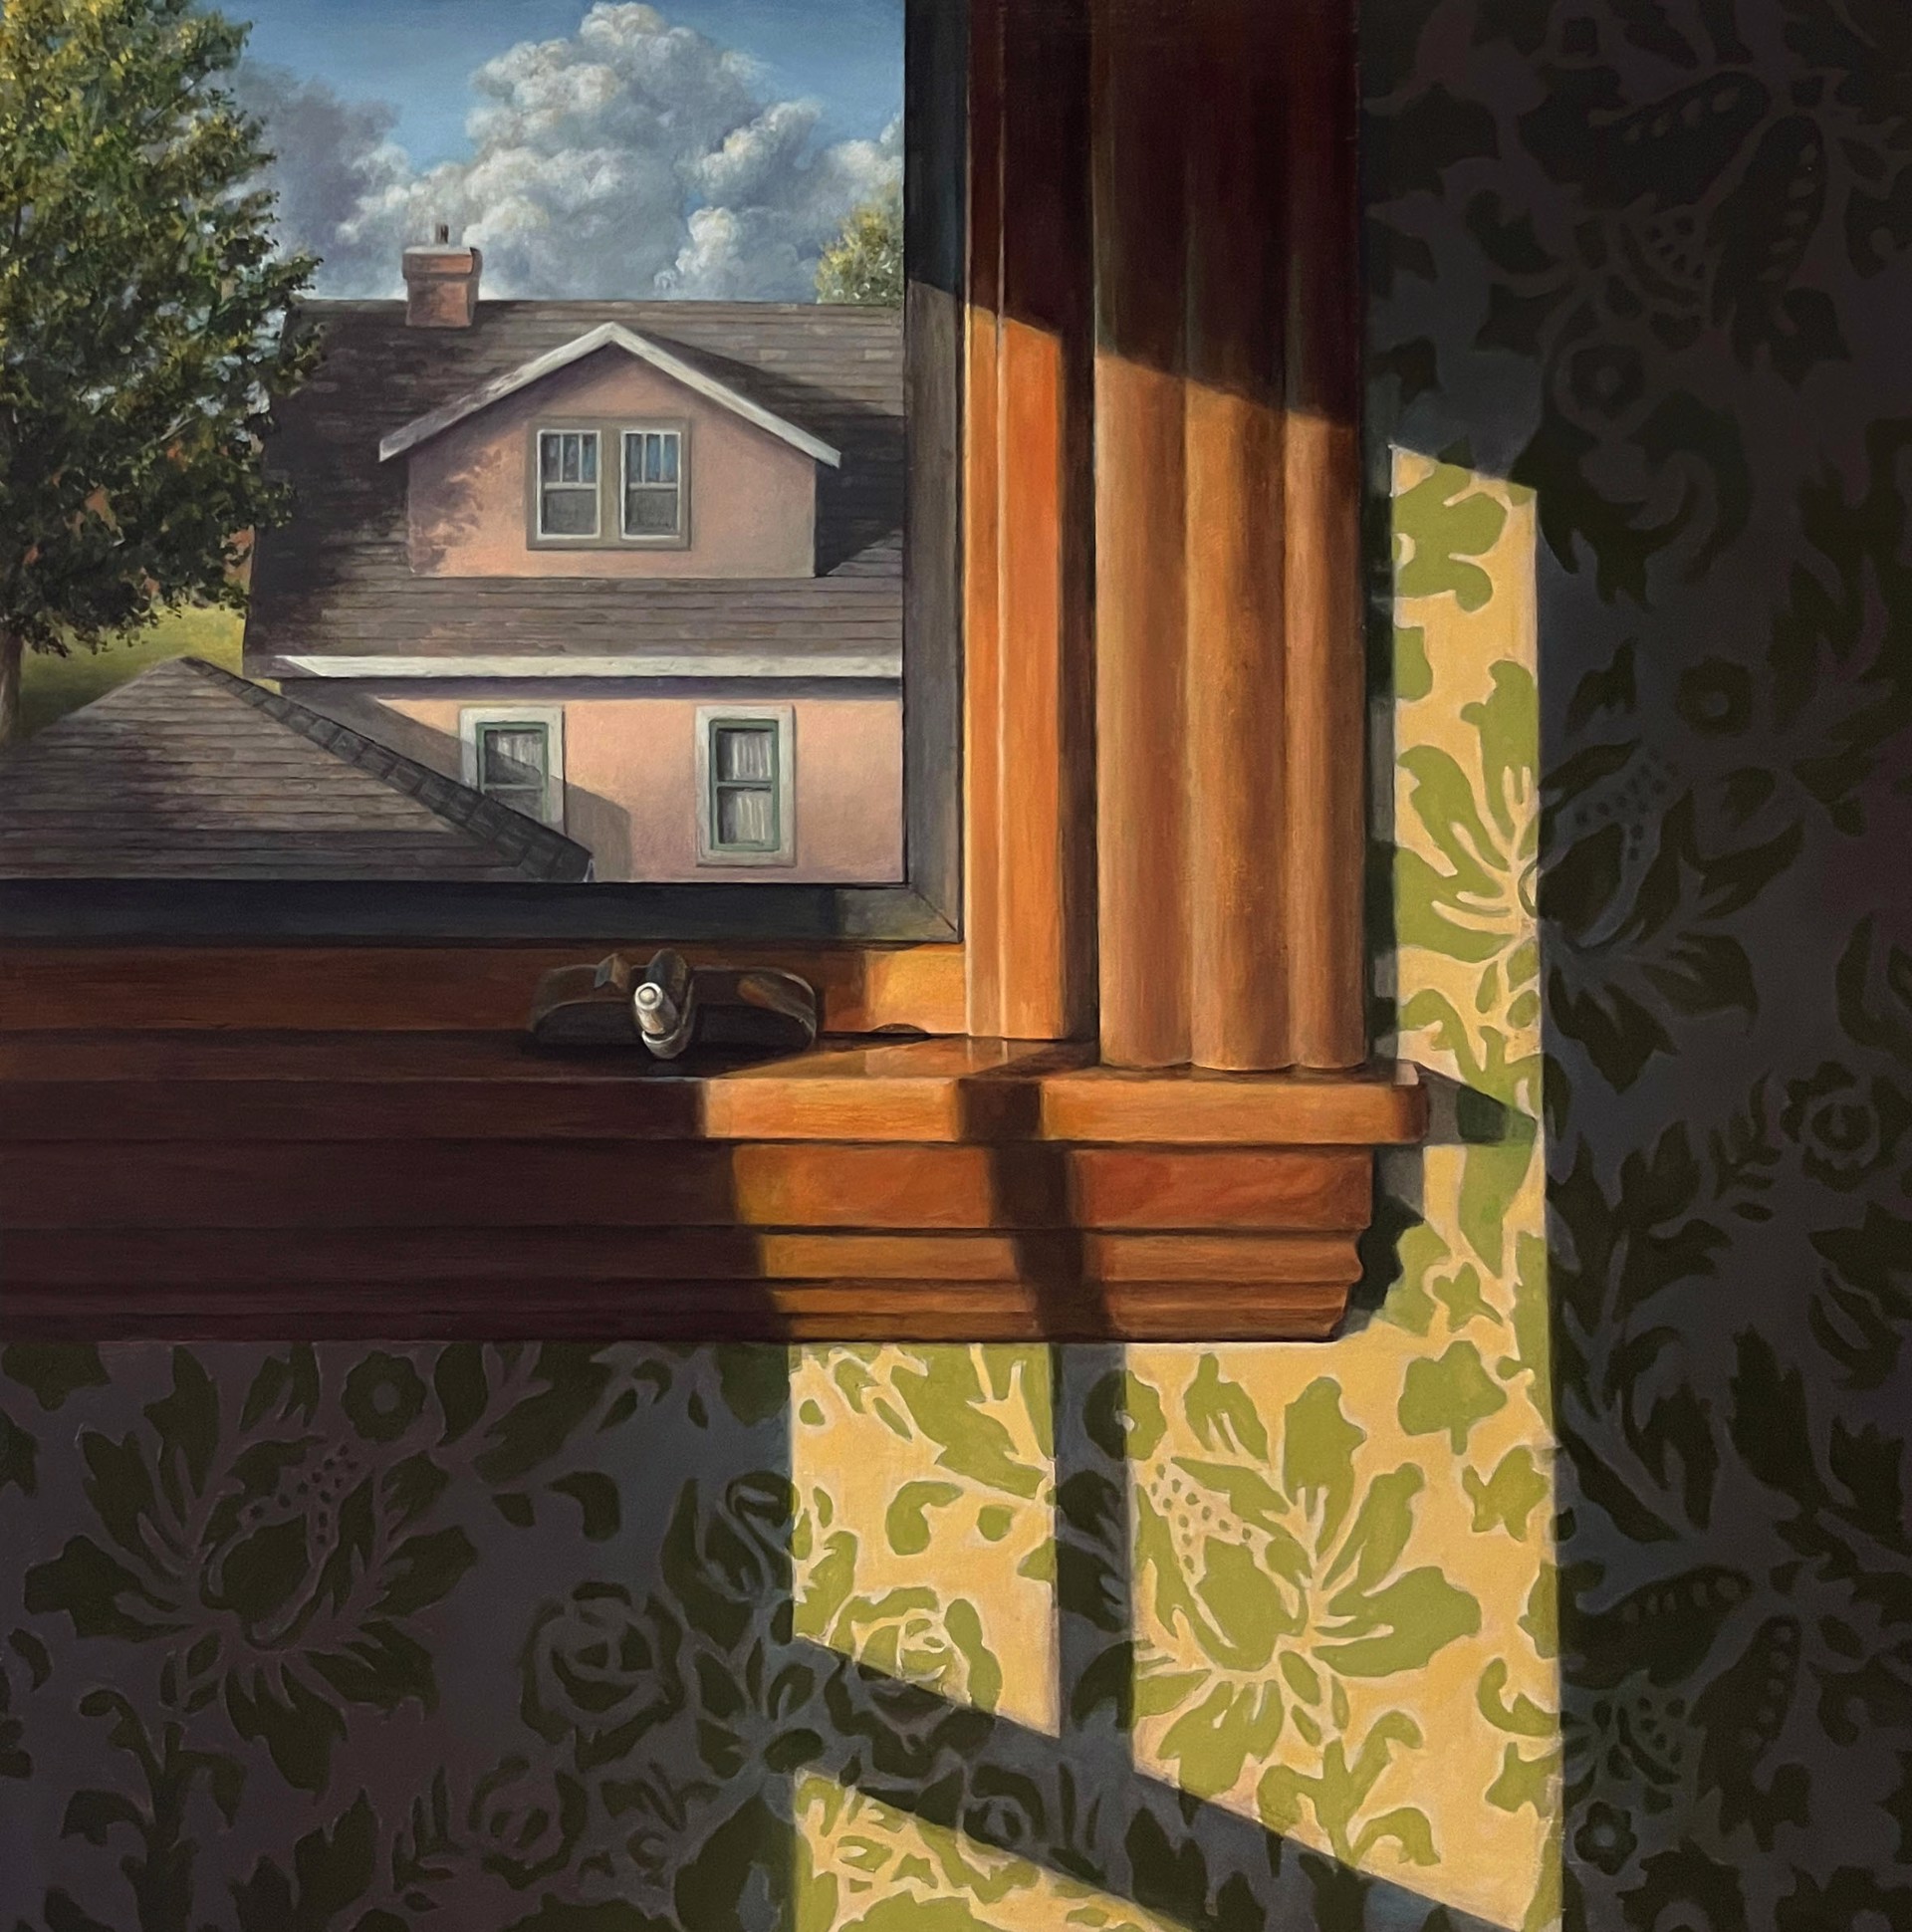 Wallpaper Shadow and House by Michael Banning